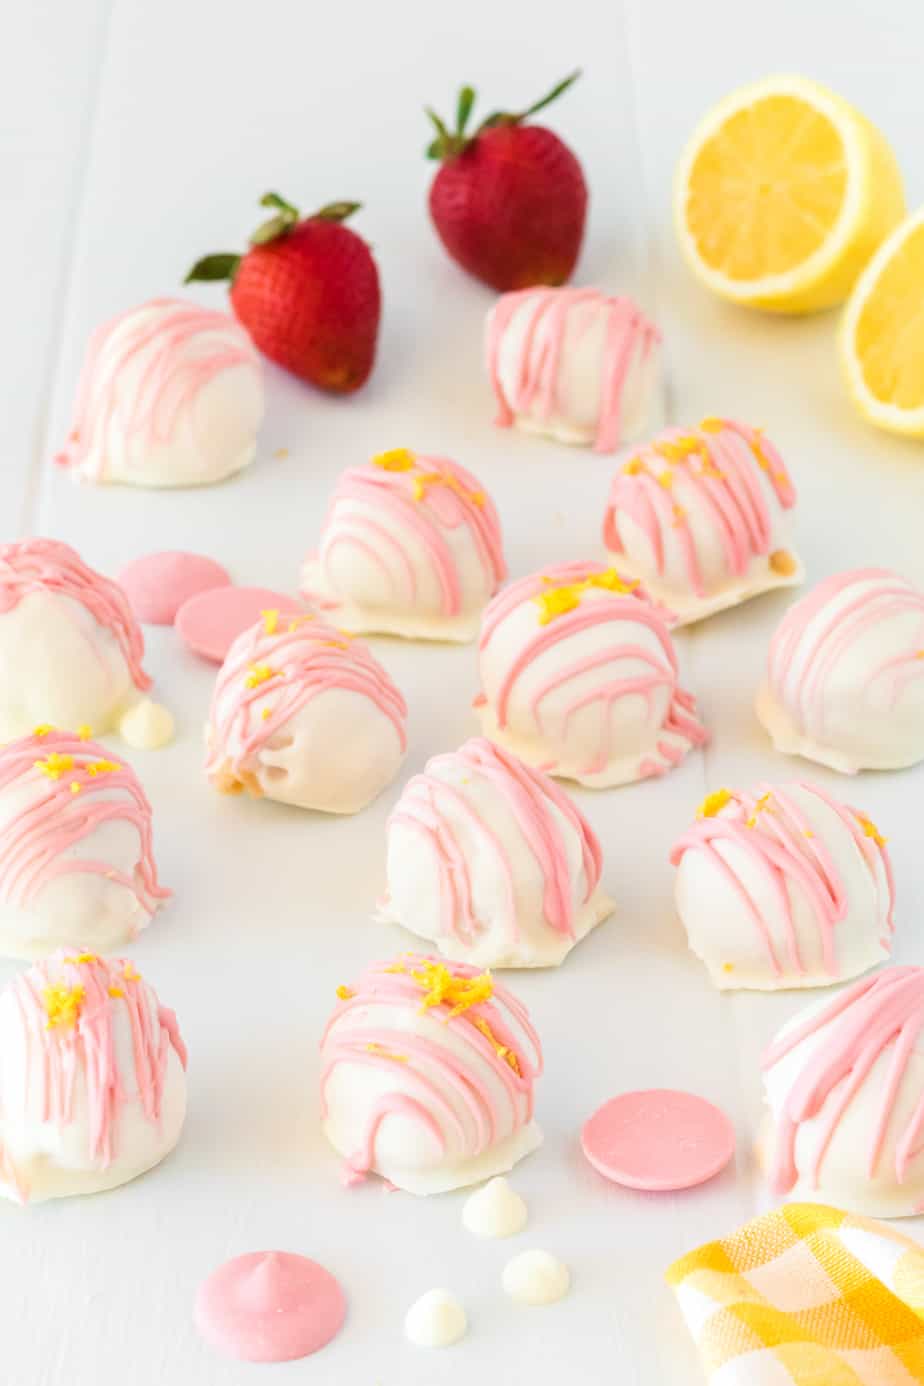 Side view of finished scattered strawberry lemonade truffles on a table with fresh strawberries and lemon nearby